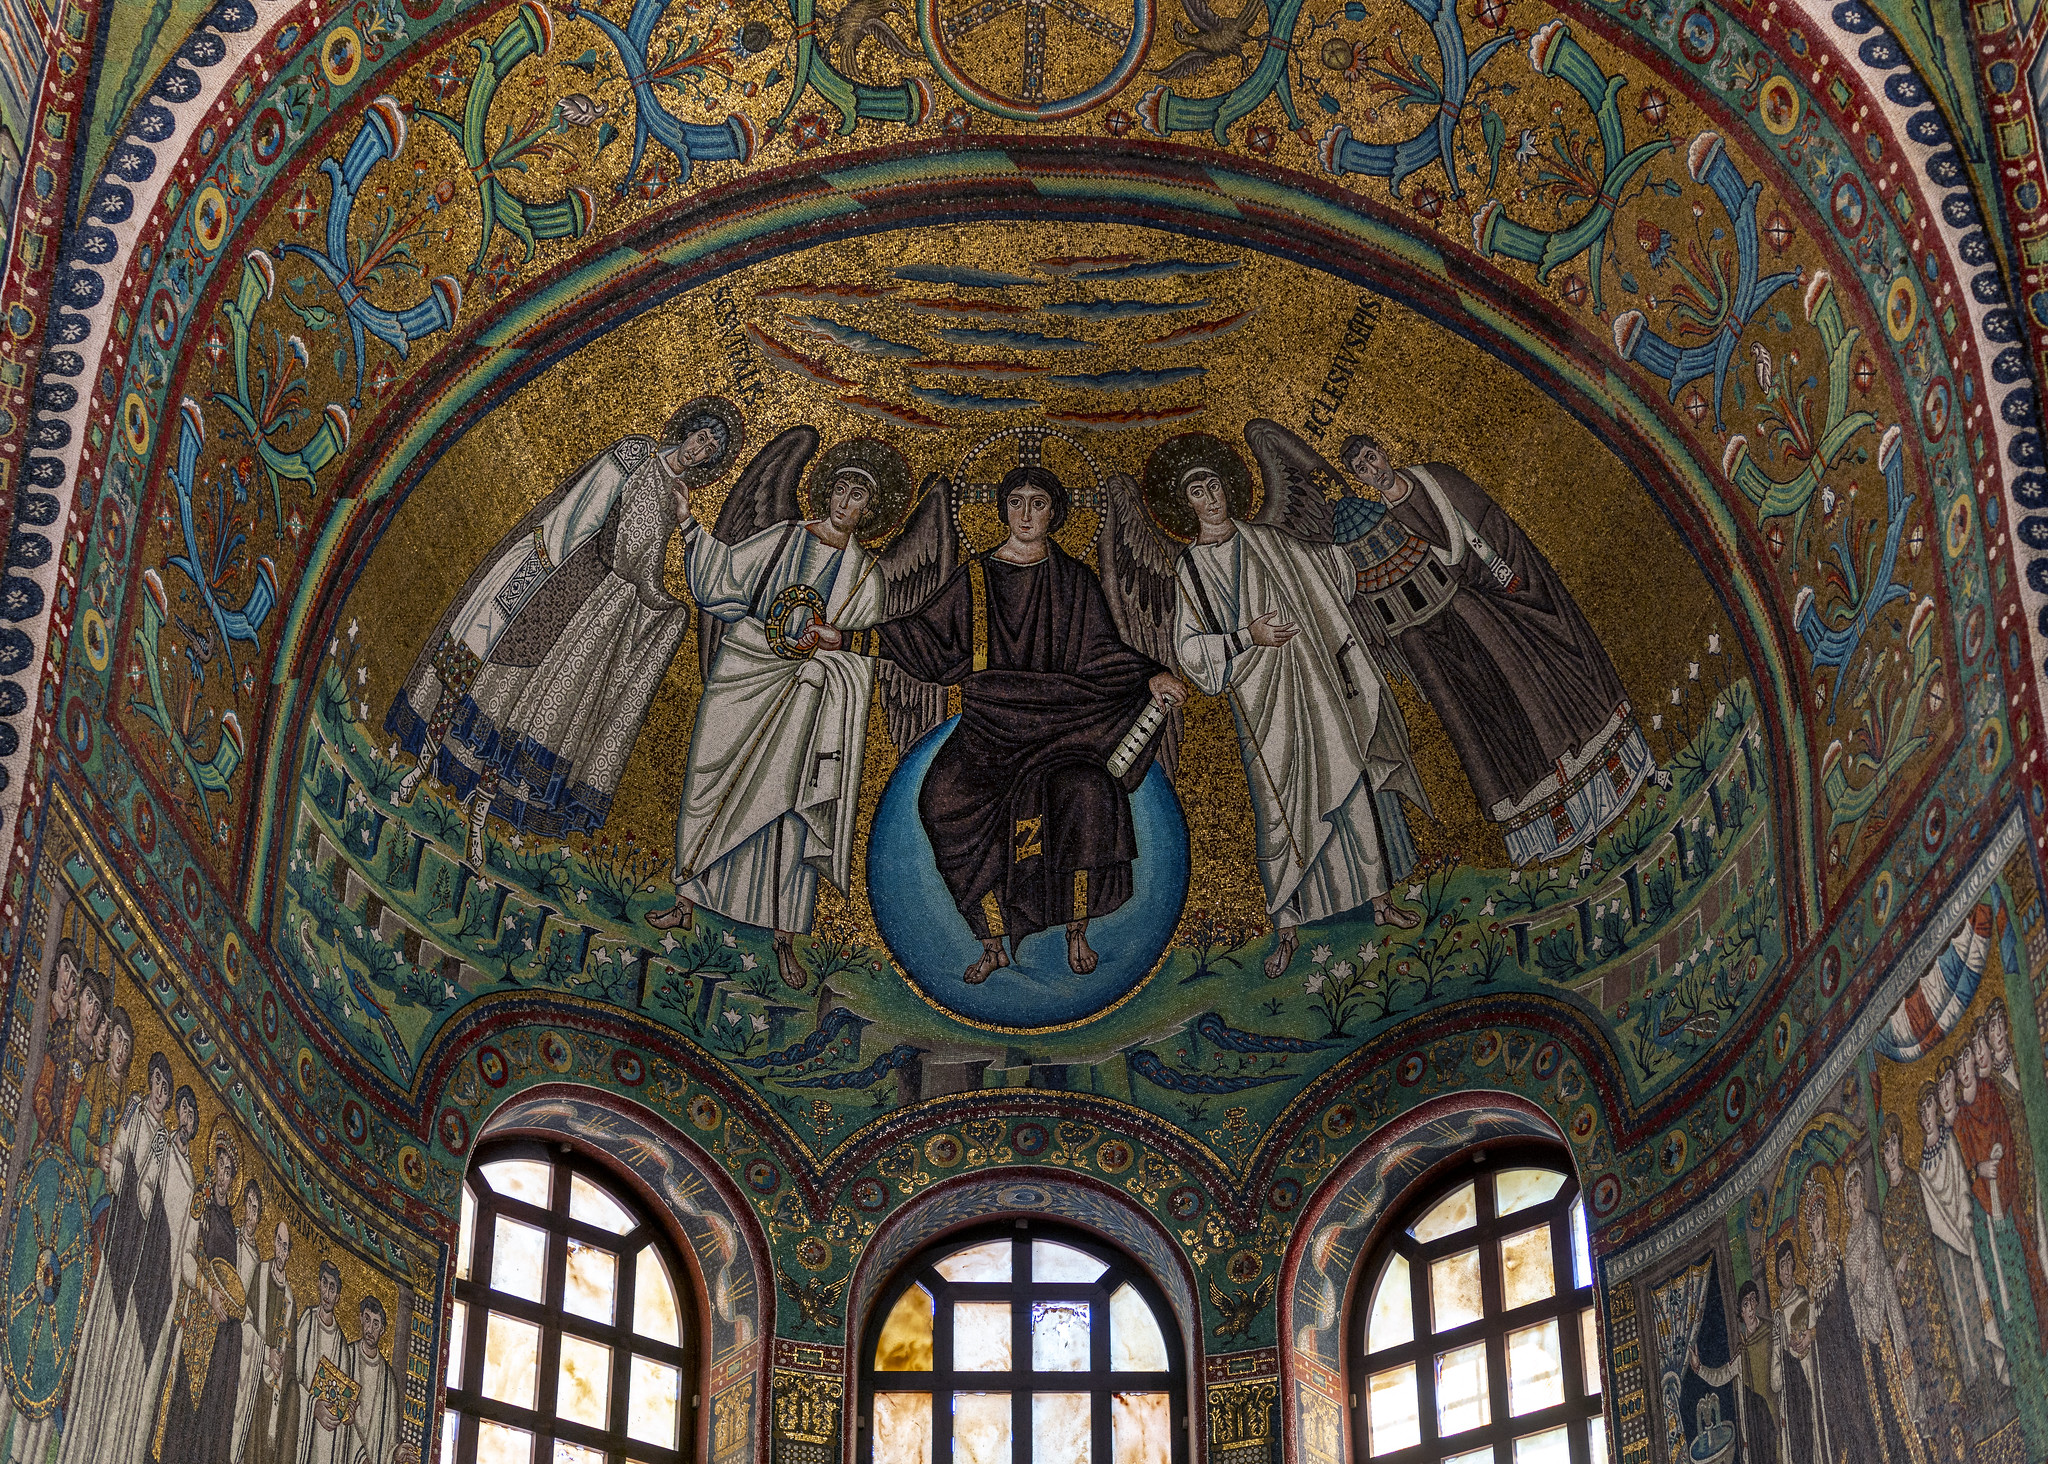 Apse with Jesus Christ and St. Vitale at center, Justinian mosaic below at lower left, San Vitale, consecrated 547, Ravenna, Italy (photo: Steven Zucker, CC BY-NC-SA 2.0)